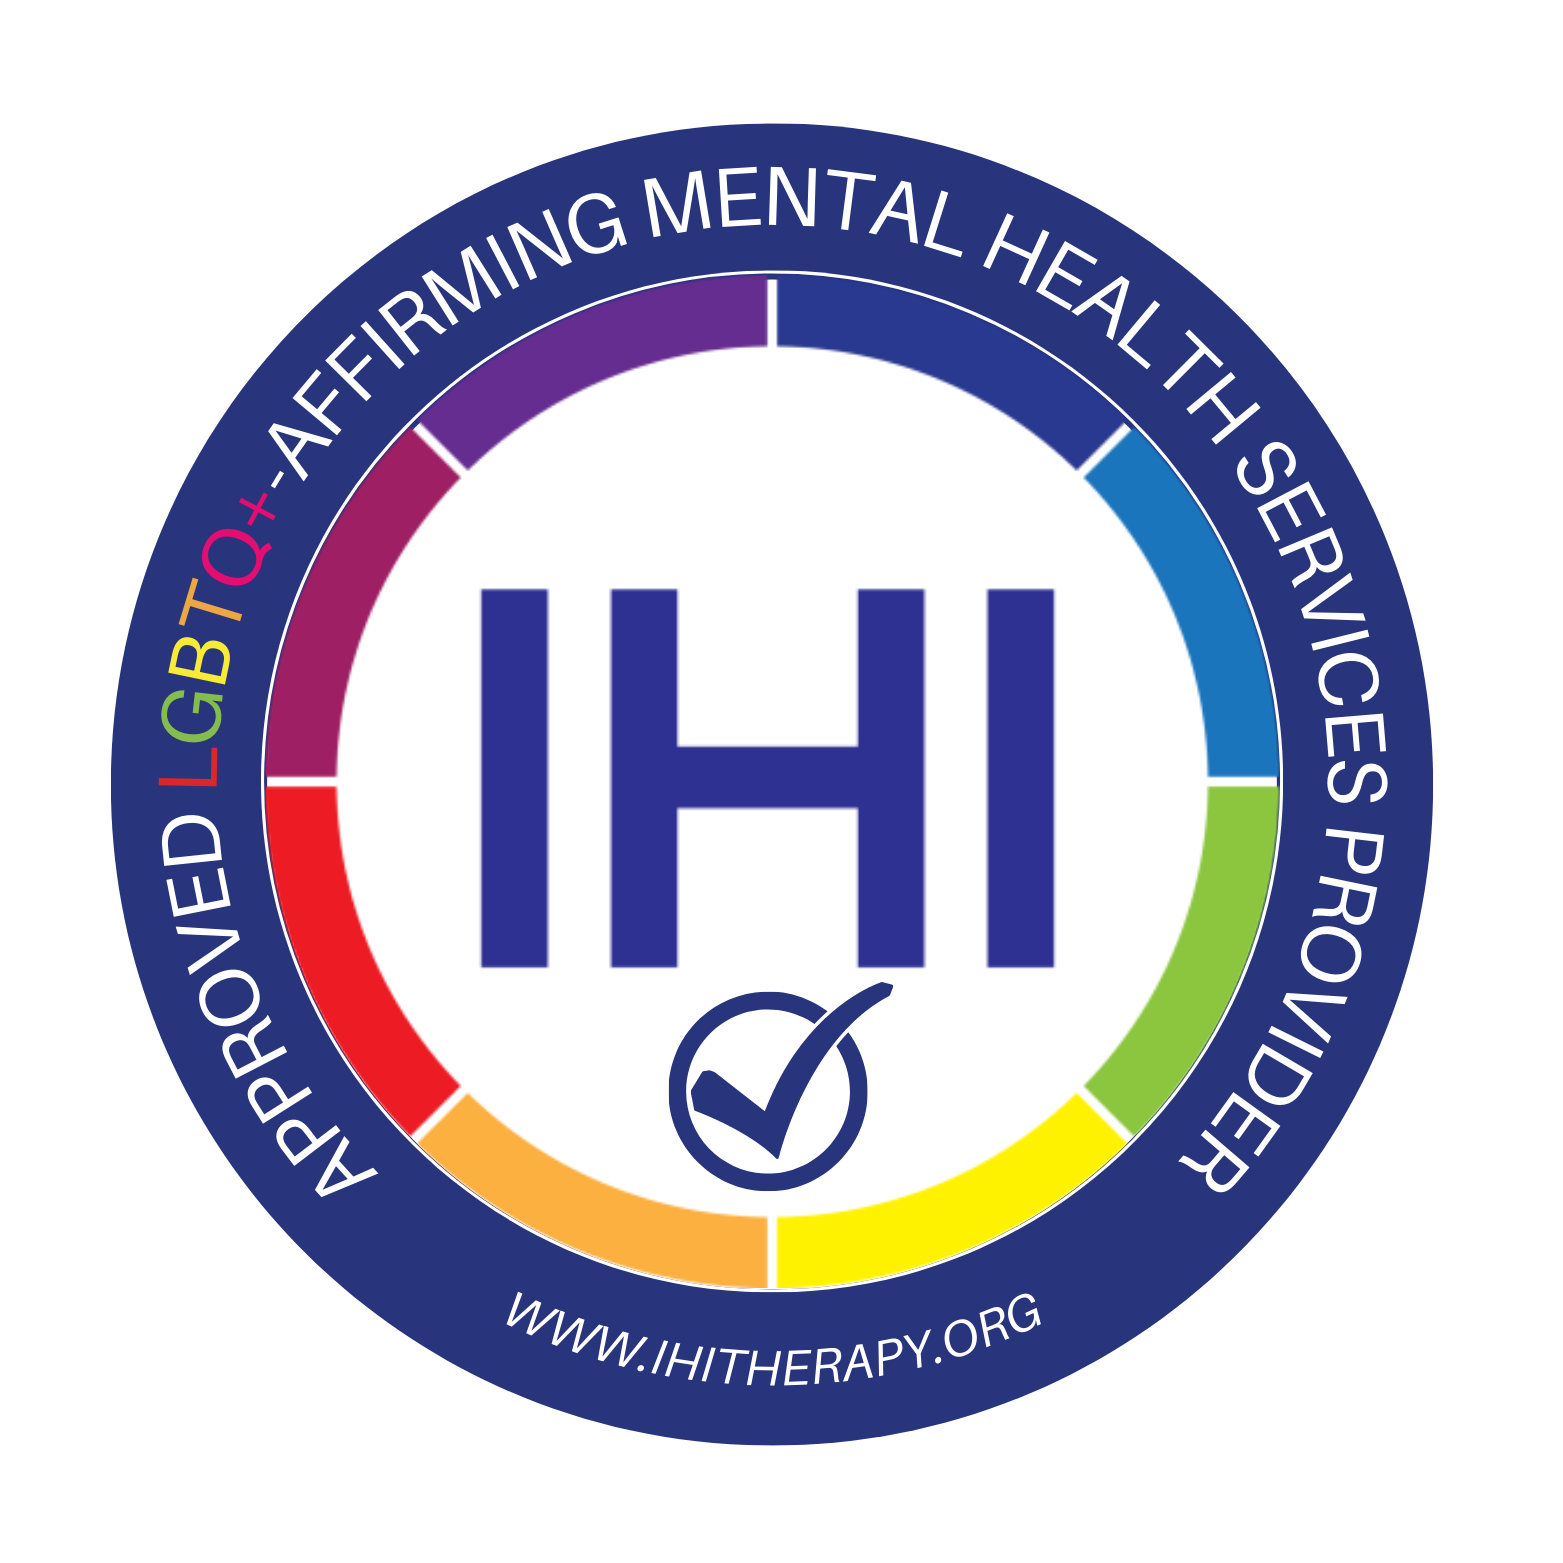 Approved LGBTQ+ Affirming Mental Health Services Provider